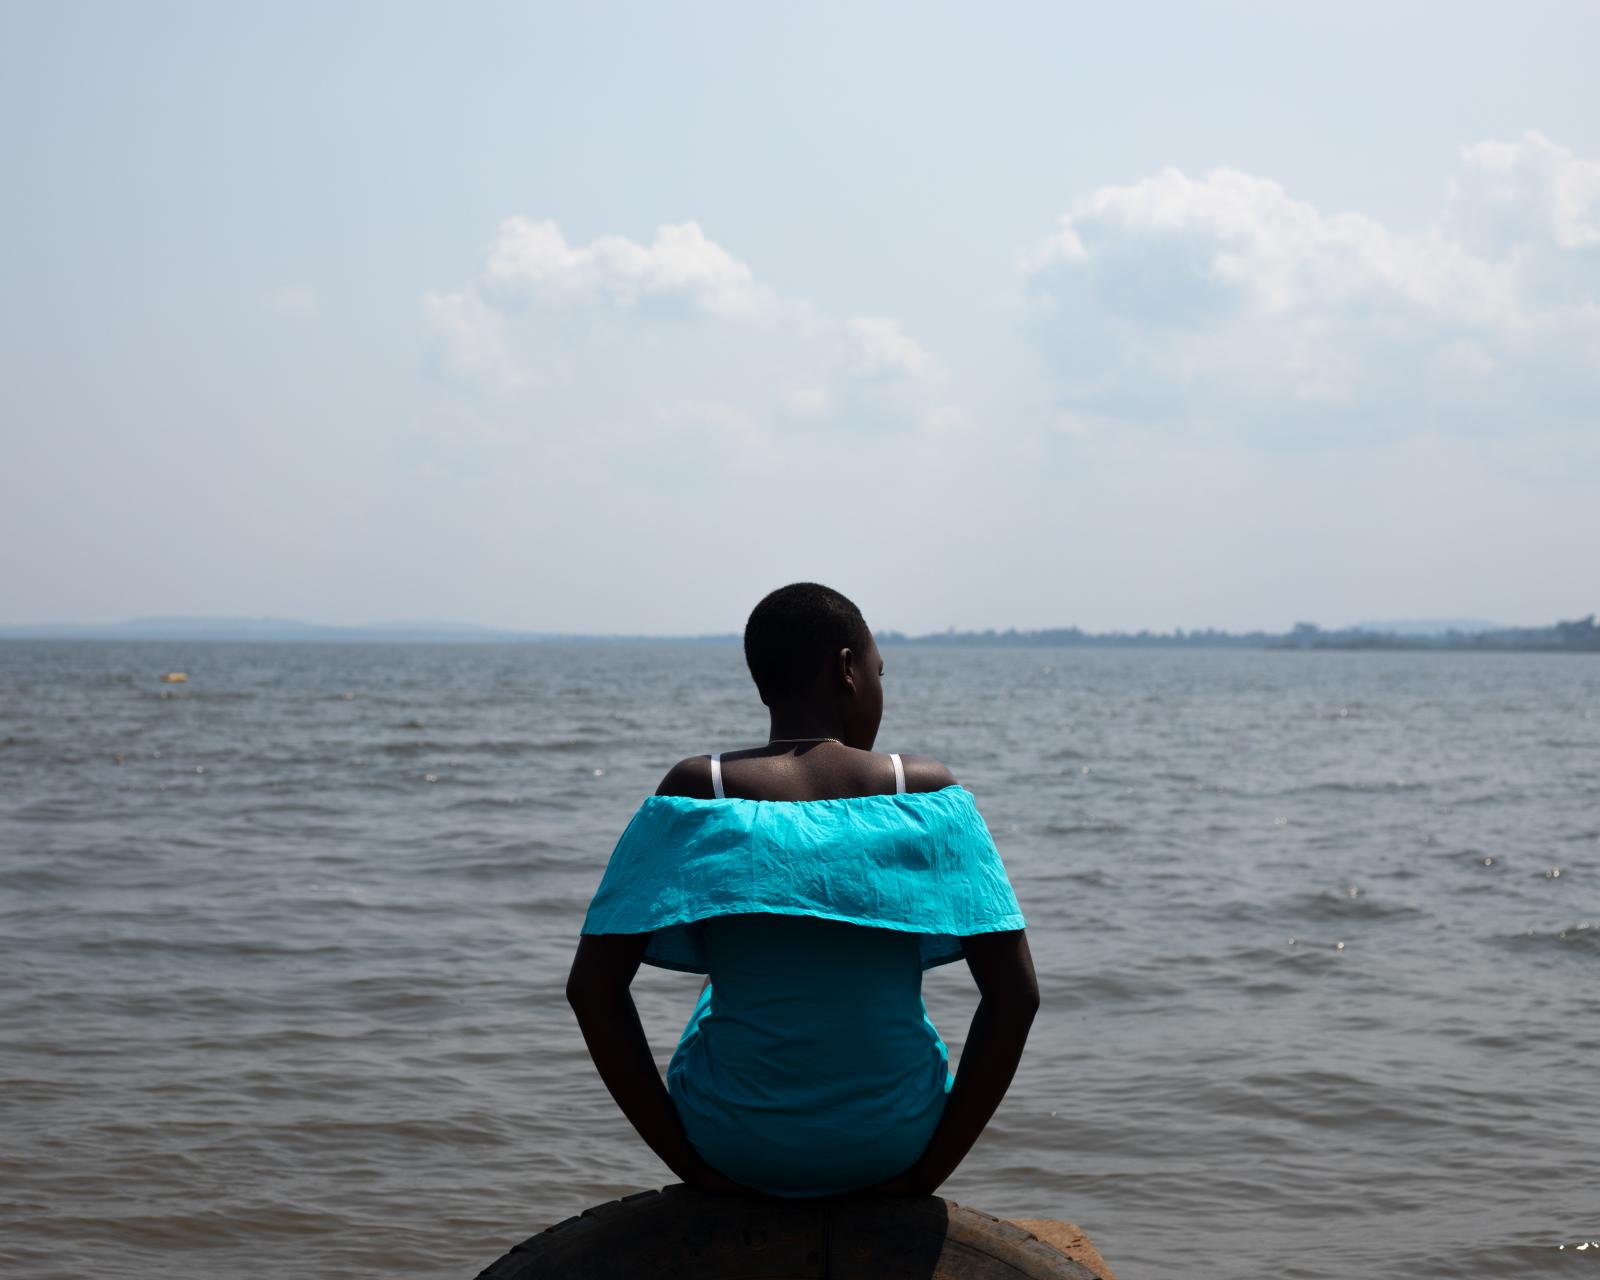 Image from Surviving Bery: A Girlhood Trauma | DeLovie Kwagala  - “The lake reminds me of love. It mothered me...